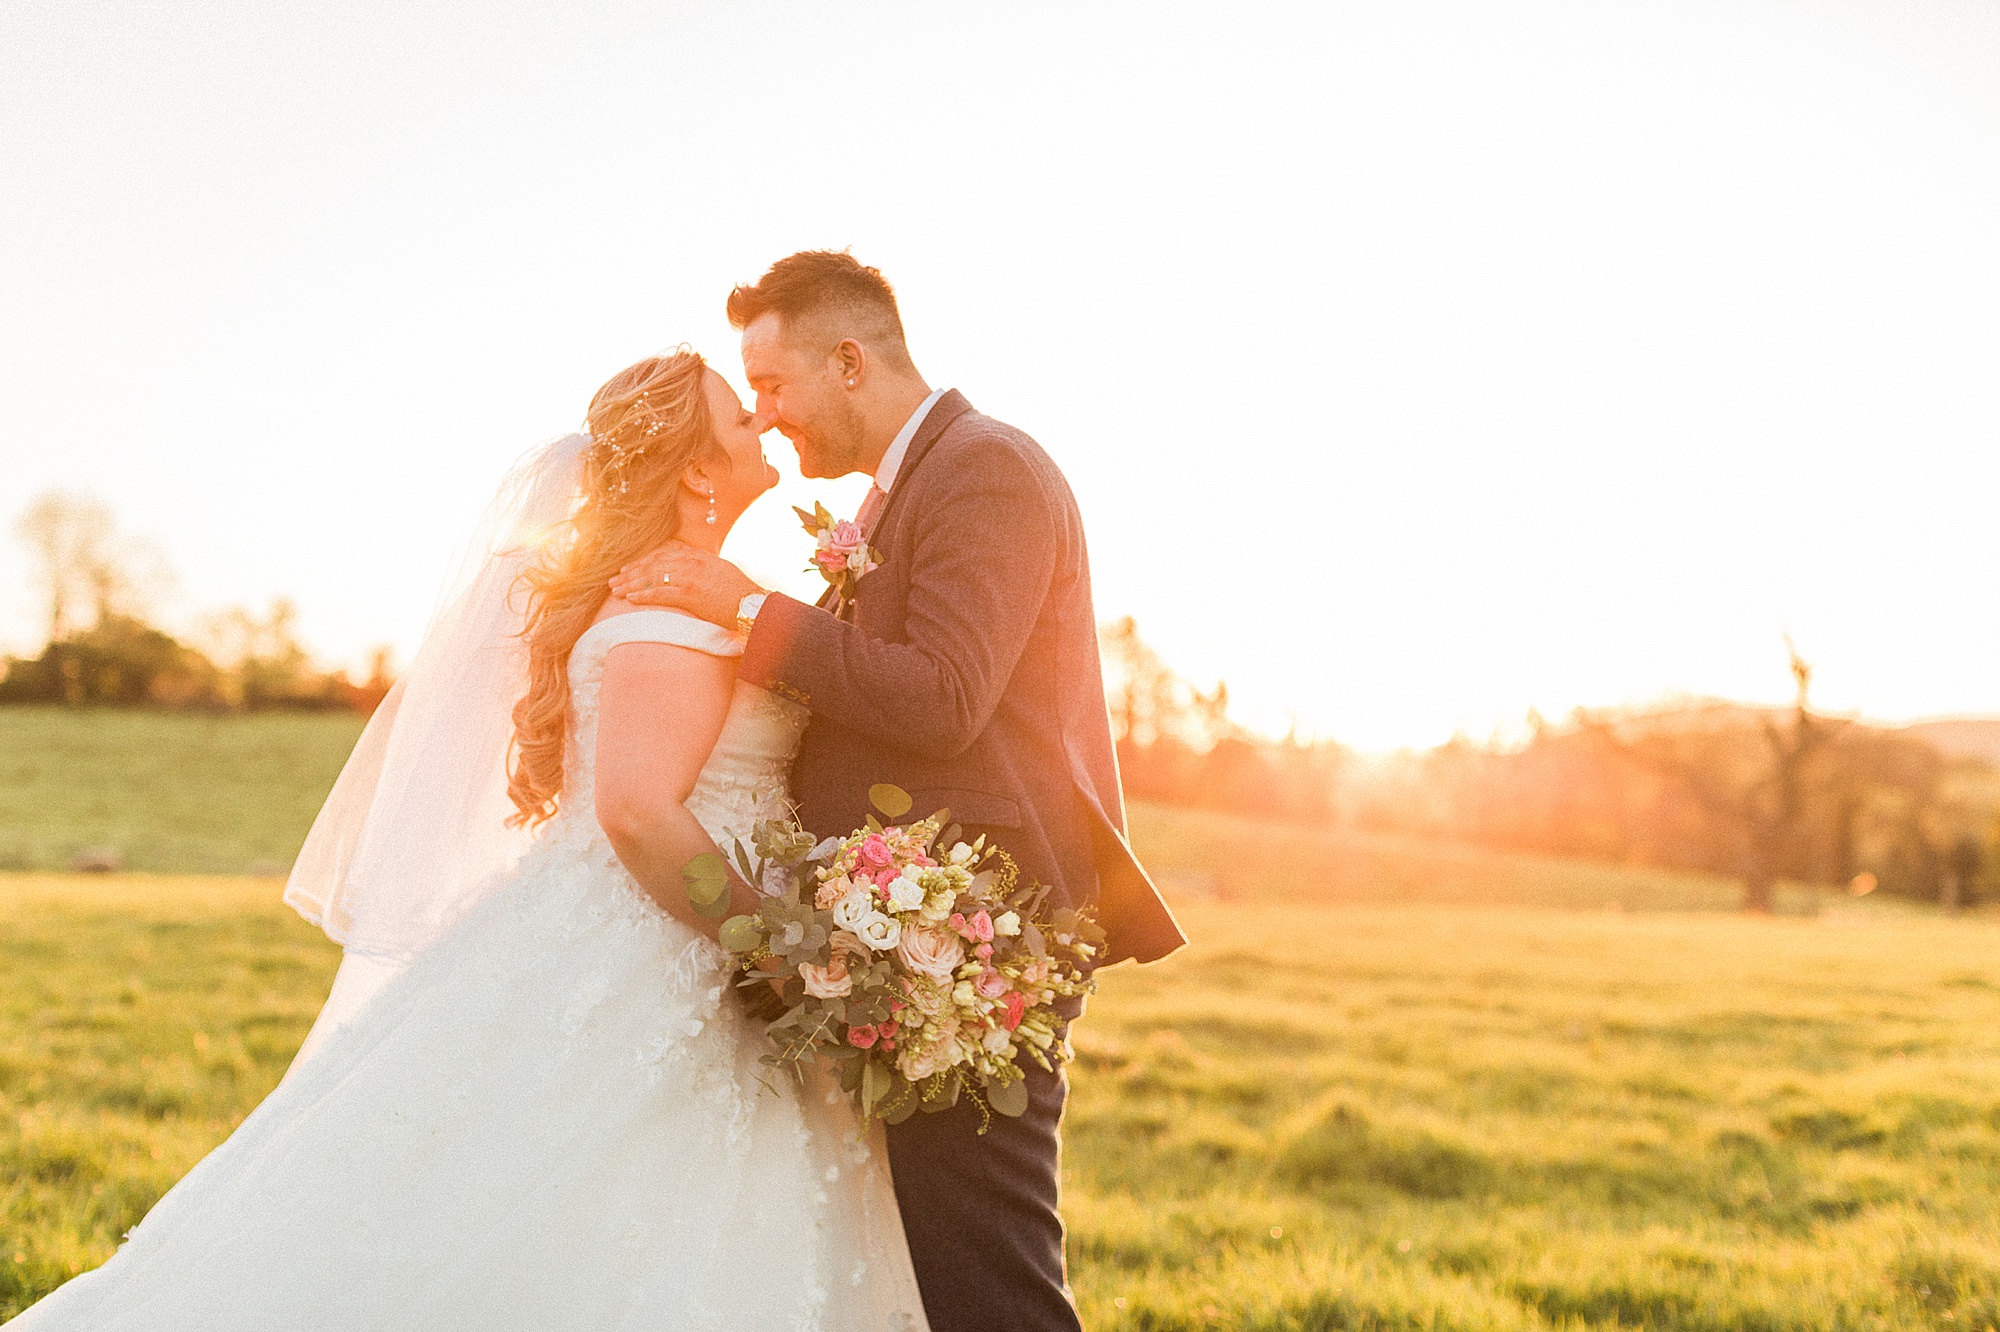 Image by Hayley Morris photography - wedding photographer in worcestershire midlands and cotswolds Image shows a bride and groom in sunset out in a field about to kiss in the sunset 